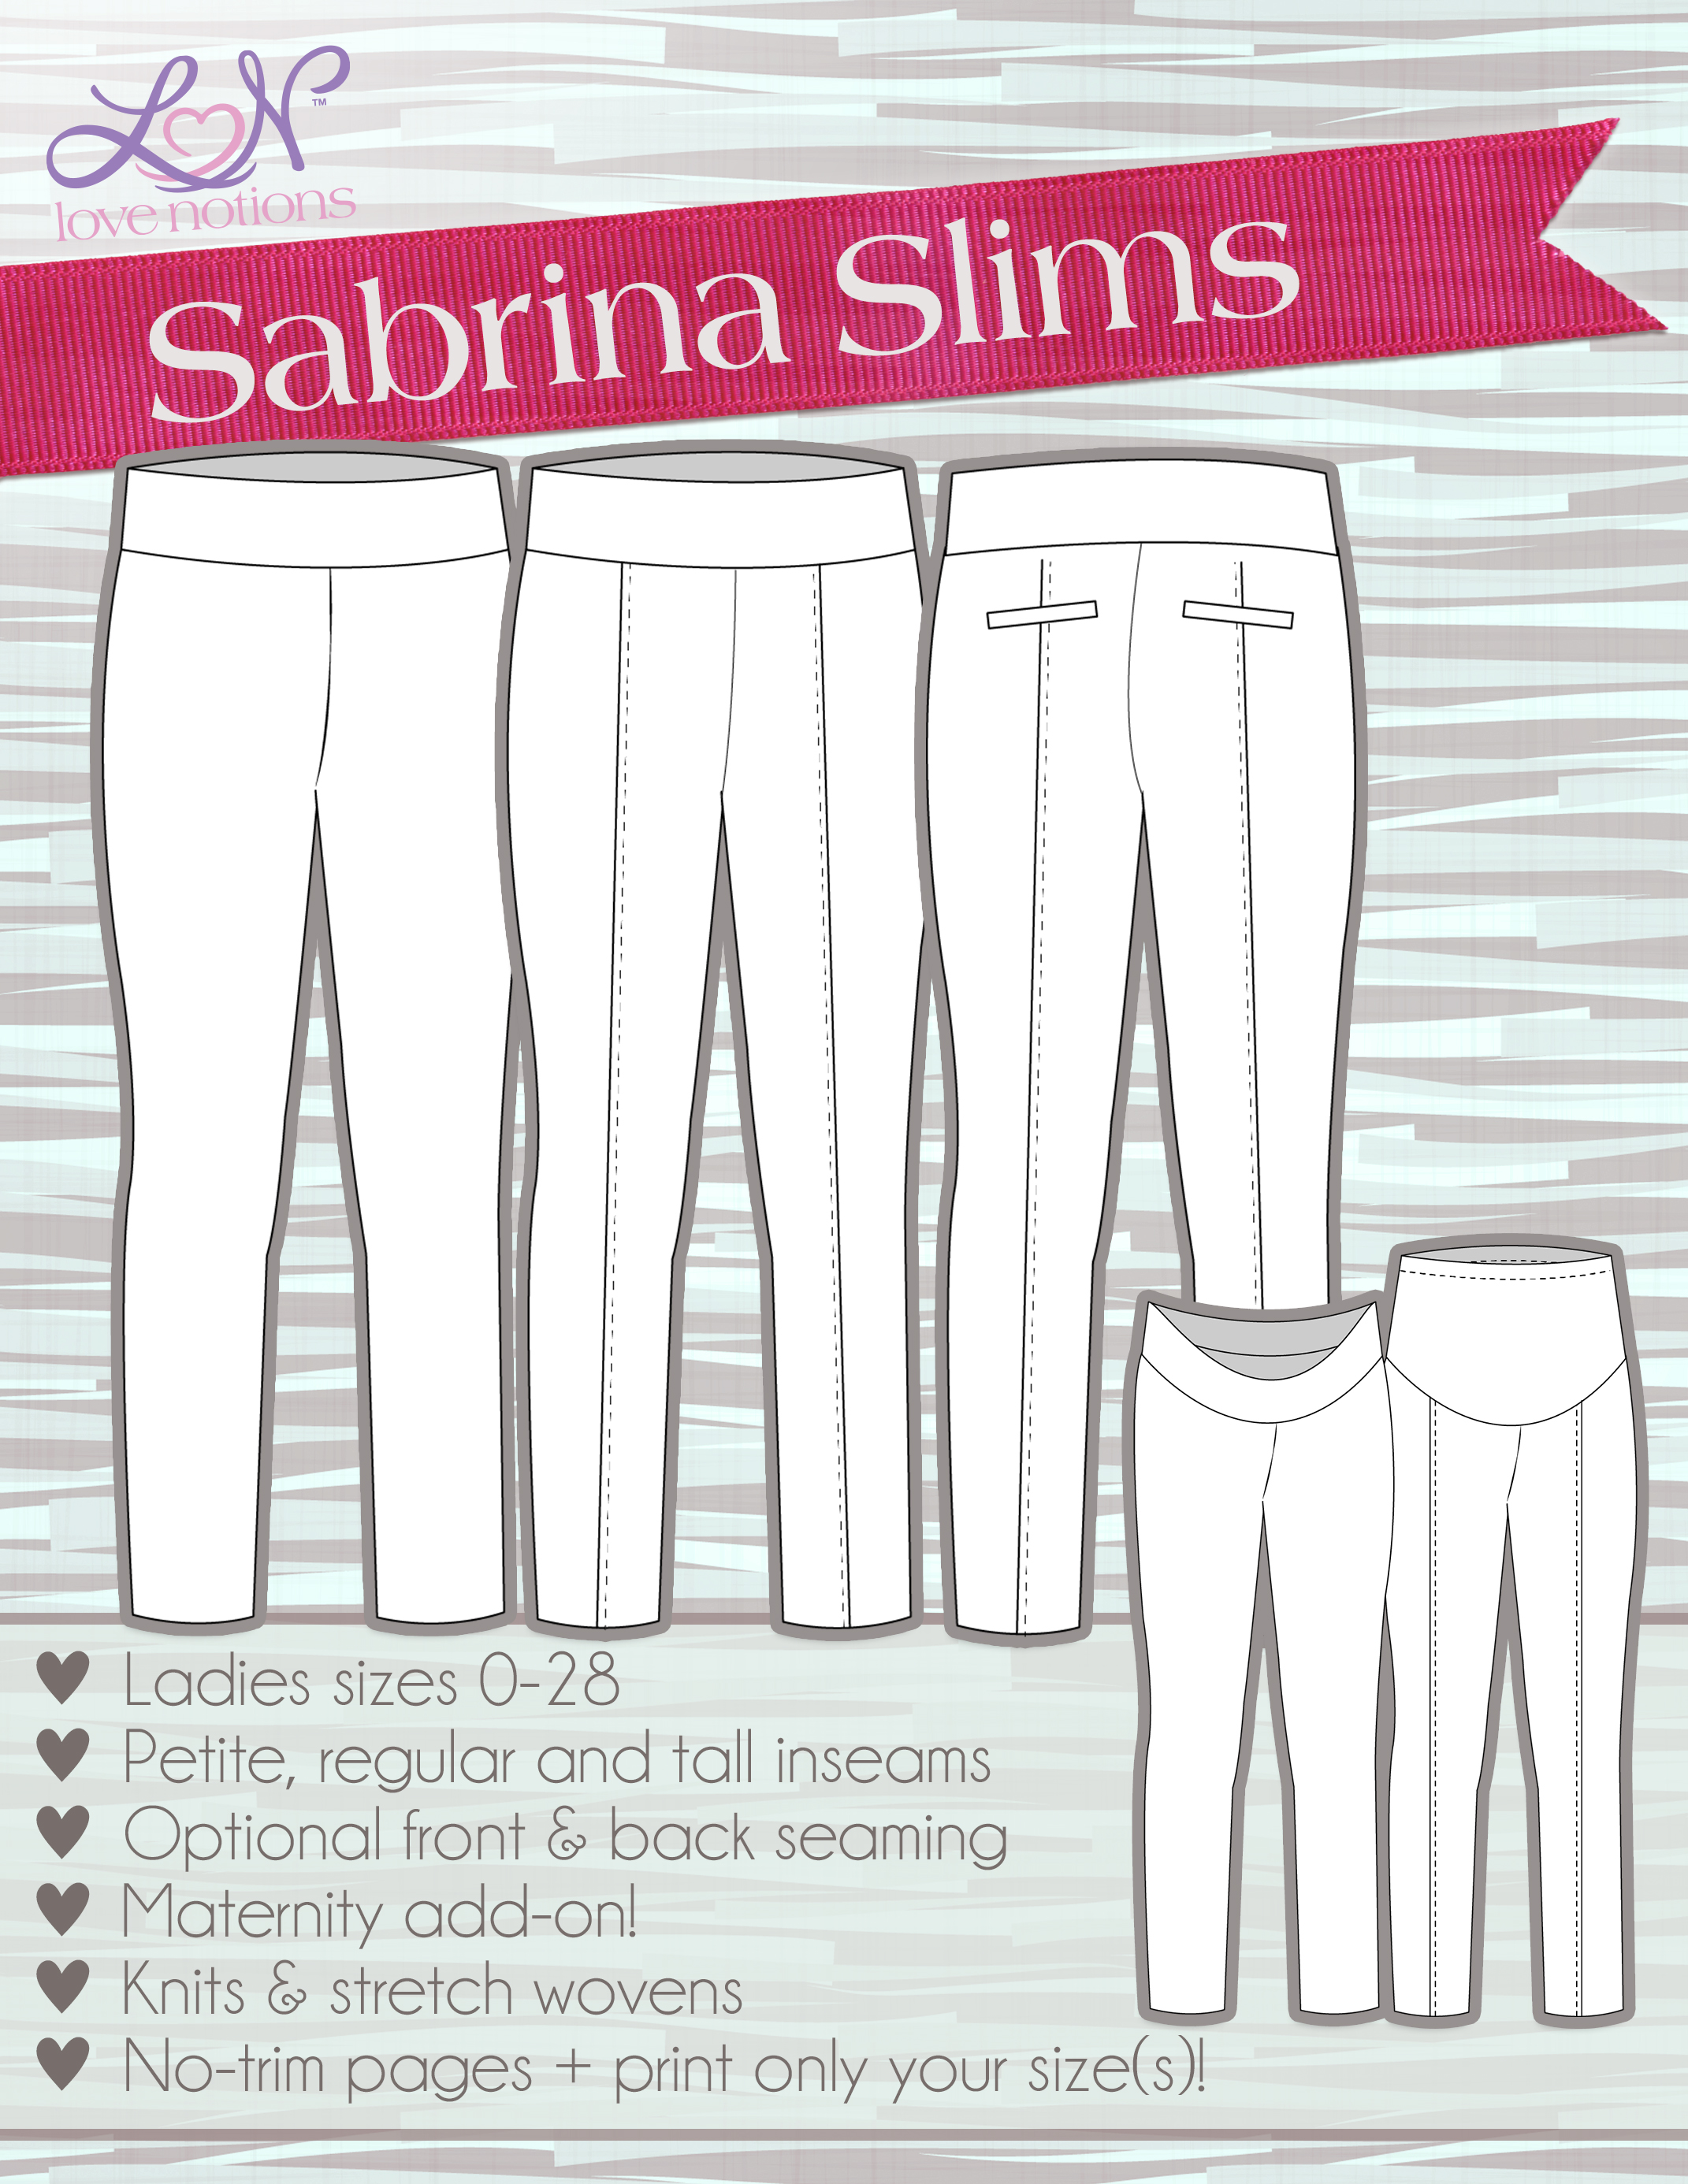 Zipper tutorial for the Sabrina Slims at Love Notions